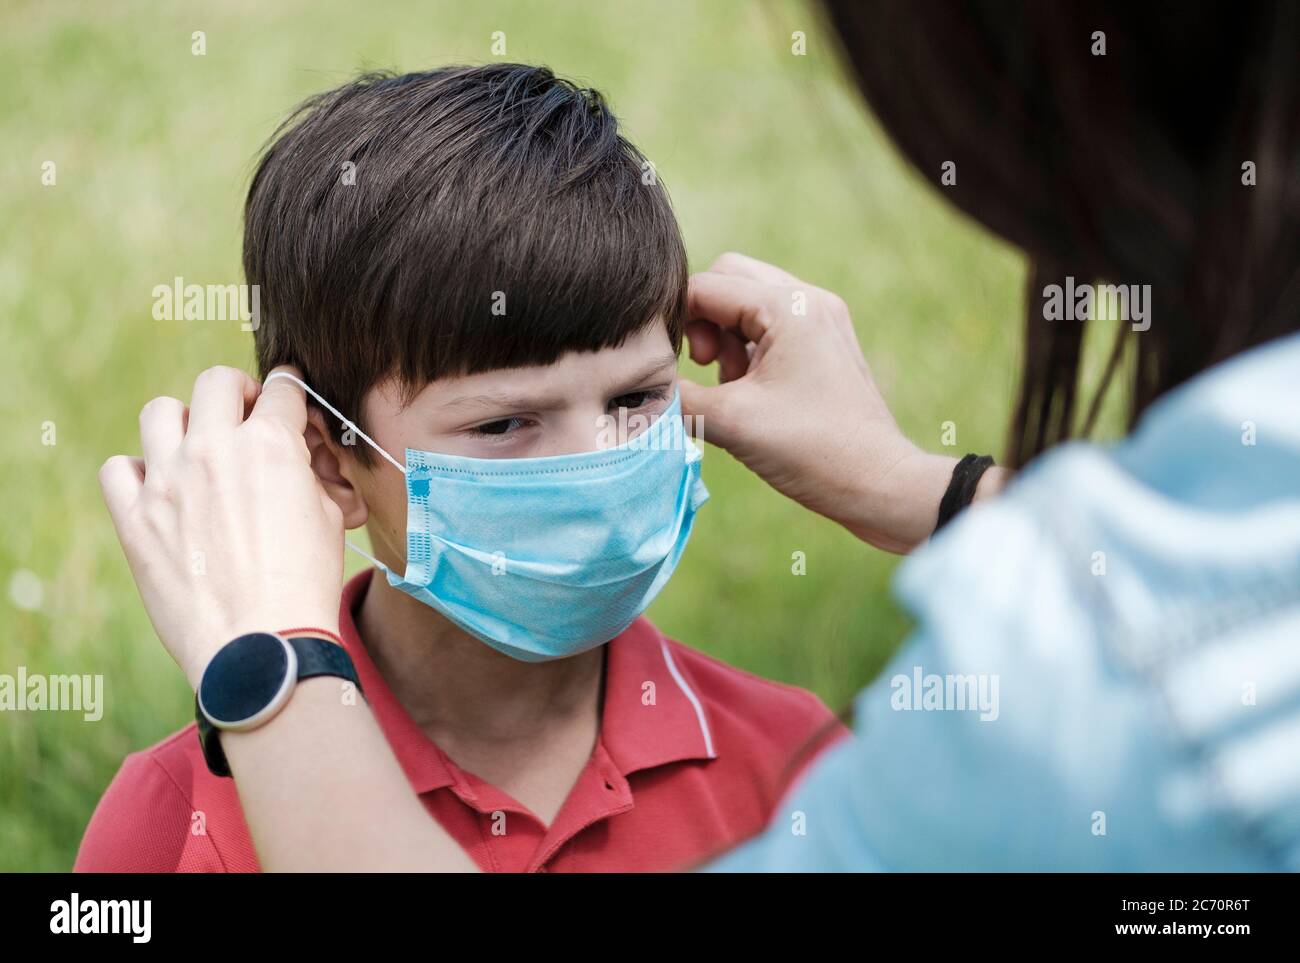 Mother fitting a young boy with a face mask as protection during the Covid-19 or coronavirus pandemic outdoors against green grass in a close up view Stock Photo